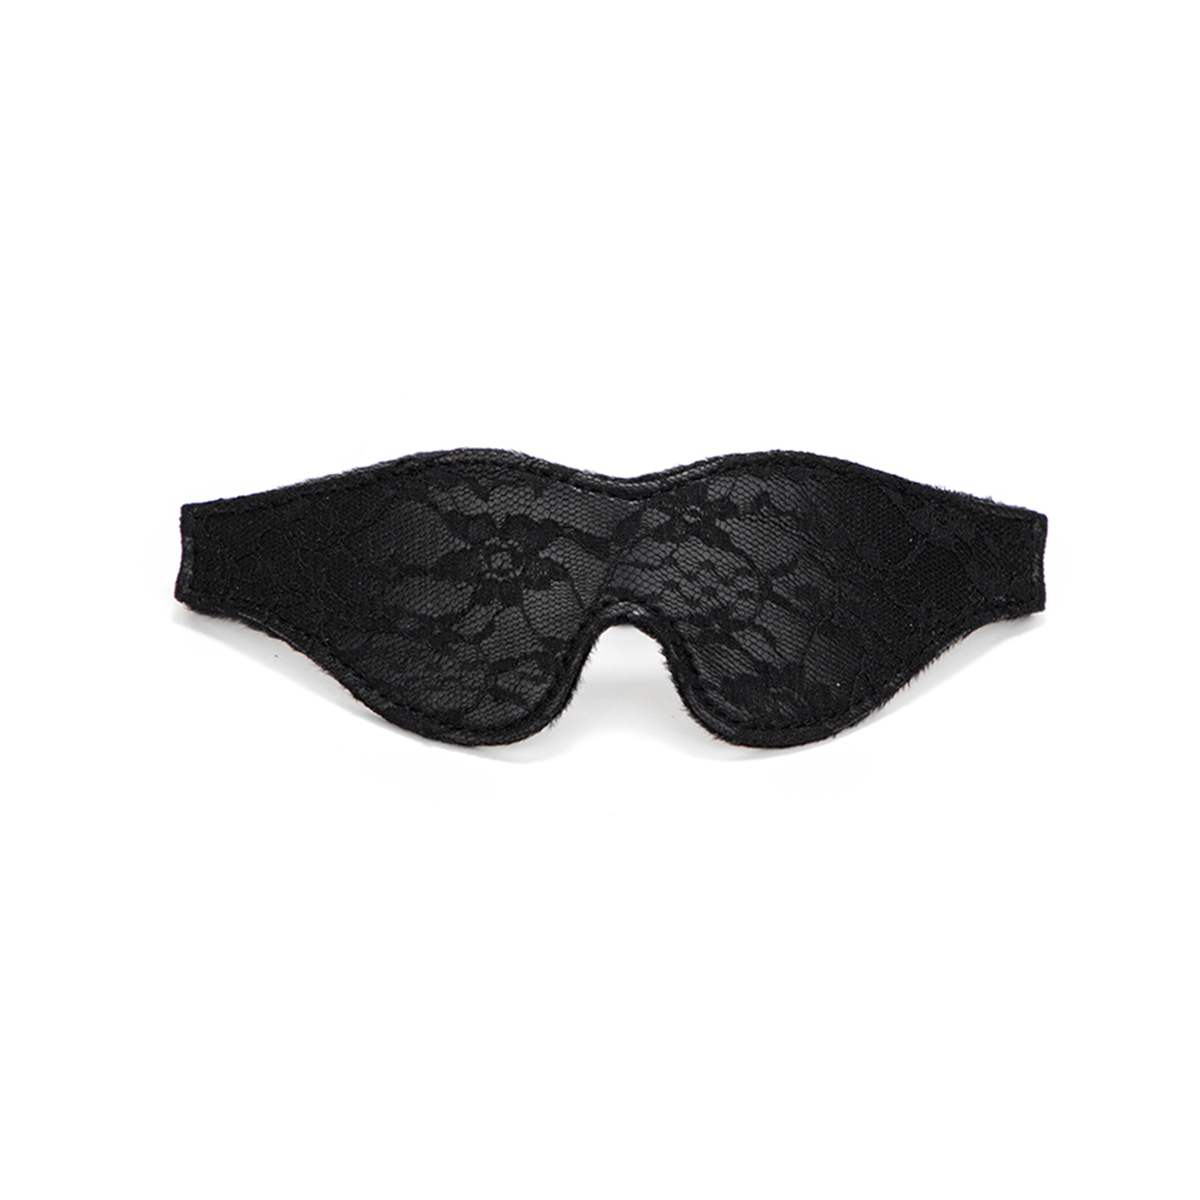 Classy Blindfold